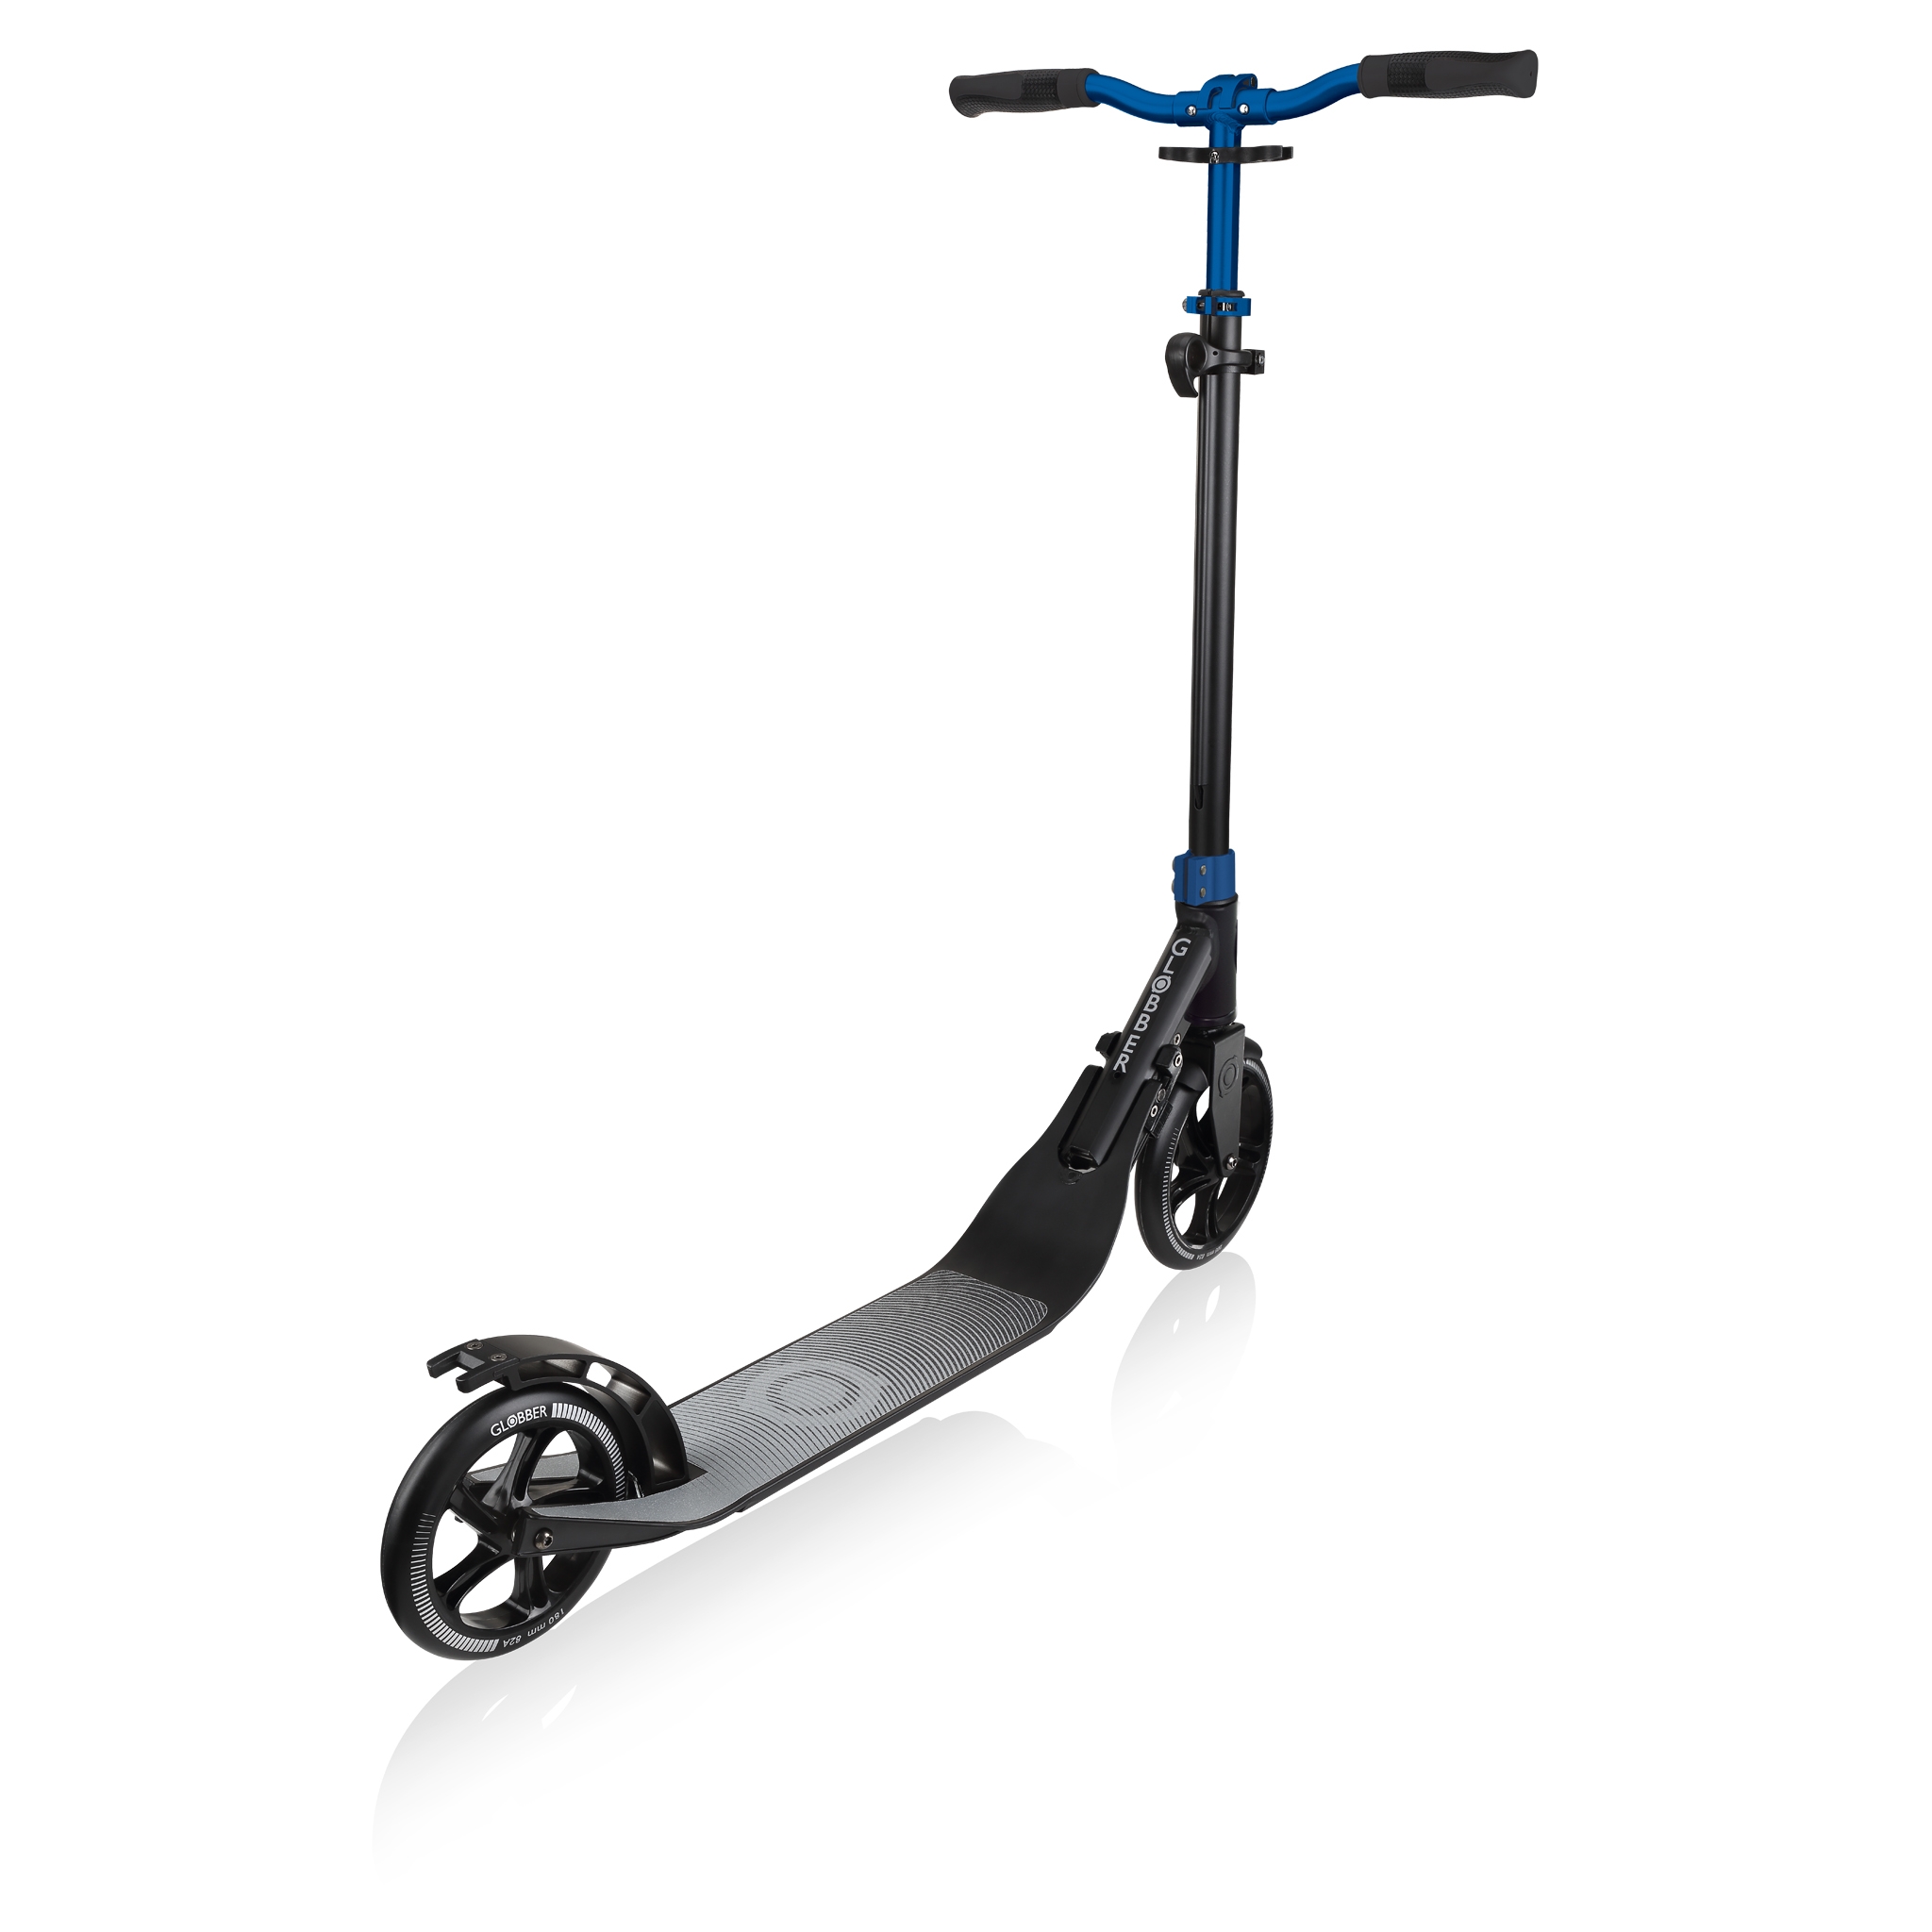 Globber-ONE-NL-205-180-DUO-2-wheel-foldable-scooter-for-adults-with-foldable-handlebar-cobalt-blue 5